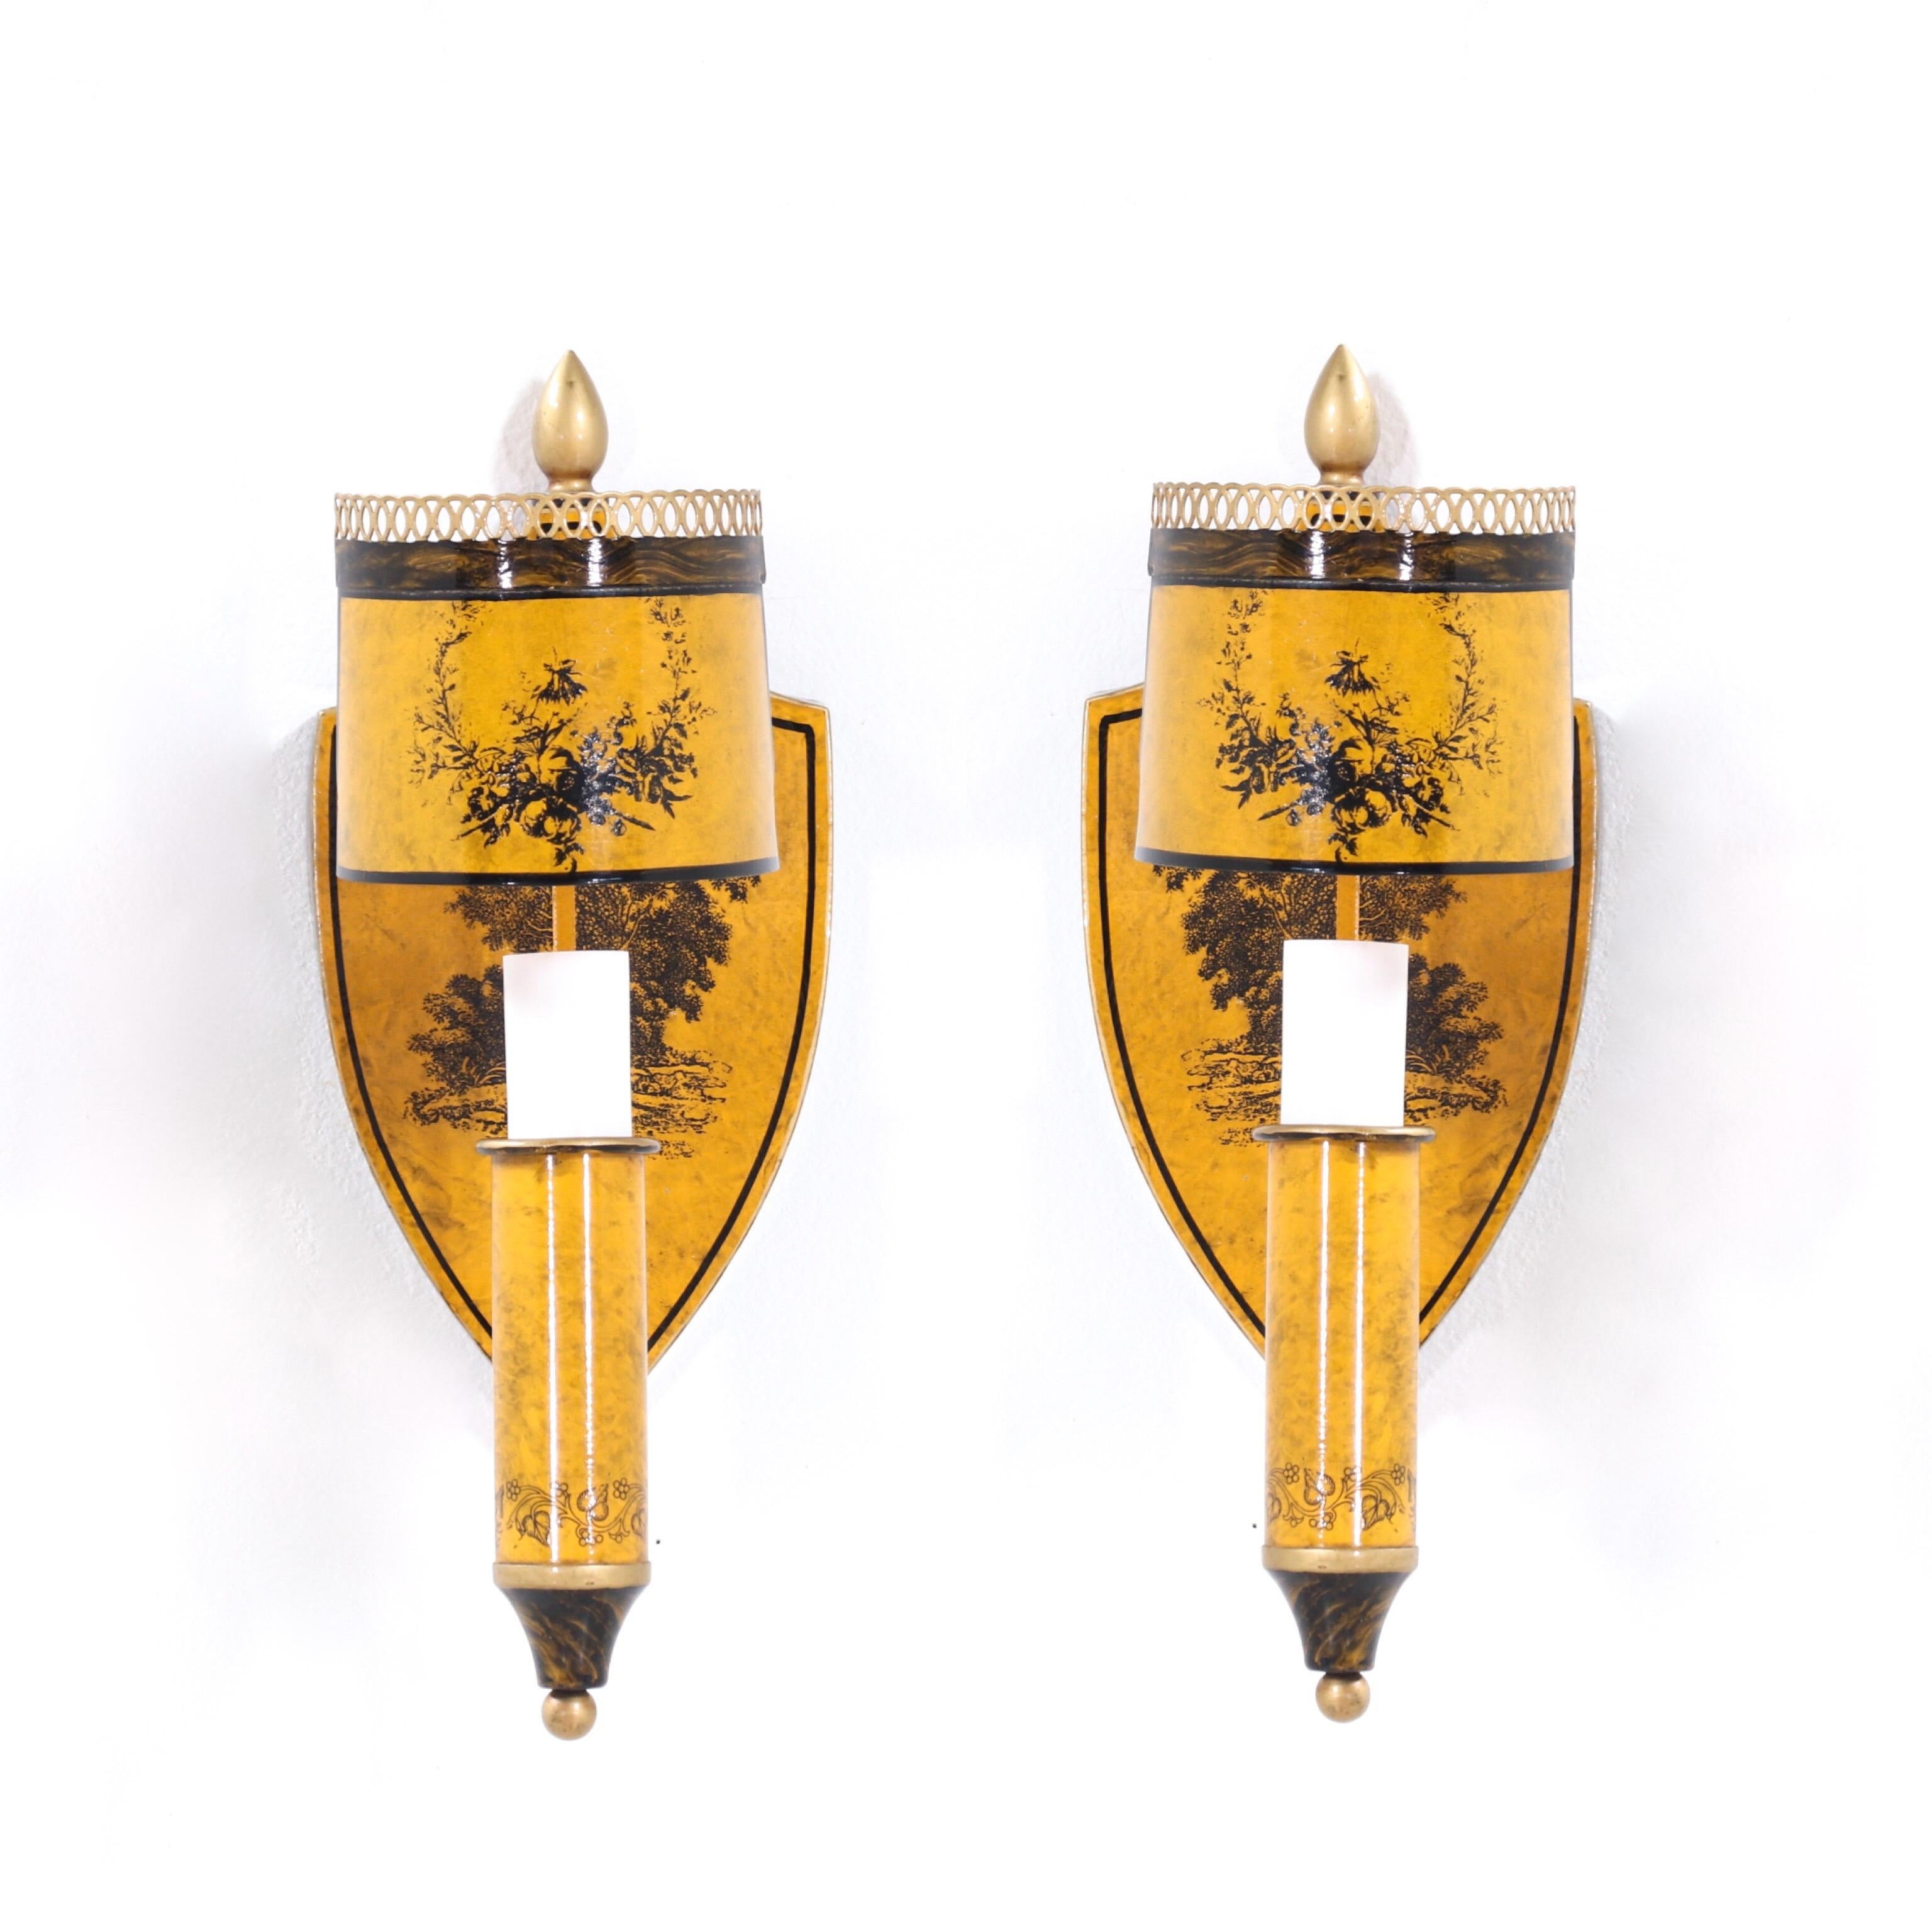 Classical, 1960s Italian tole painted sconces in the neoclassical style. 

Each of these, beautifully preserved, all metal sconces consist of a shield-back design with a removable matching shade to diffuse the light from the Edison base